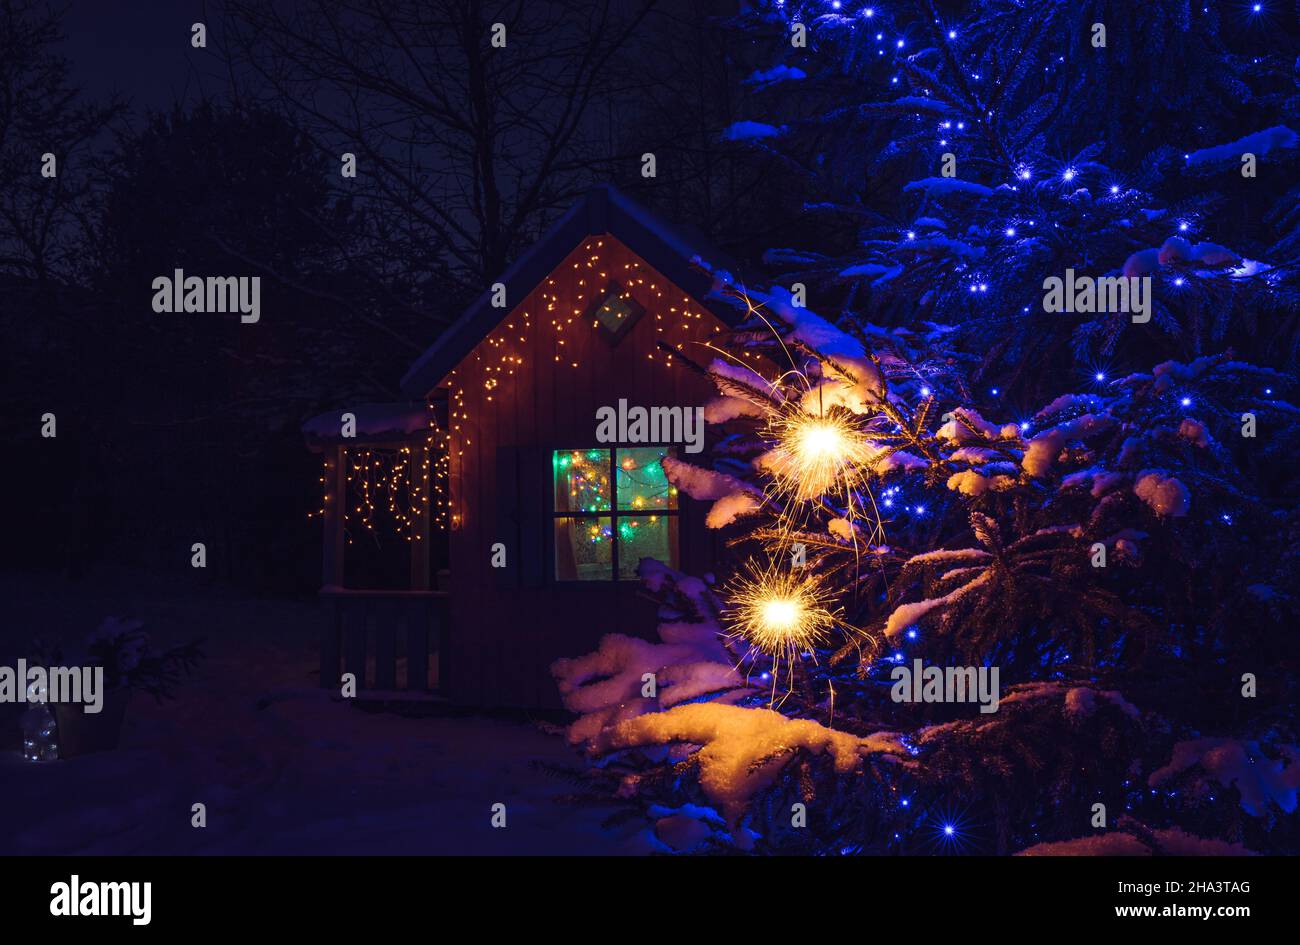 Selective focus on sparkler candles hanging and burning on spruce tree outdoors on snowy winter night. Cute decorated playhouse on background. Stock Photo